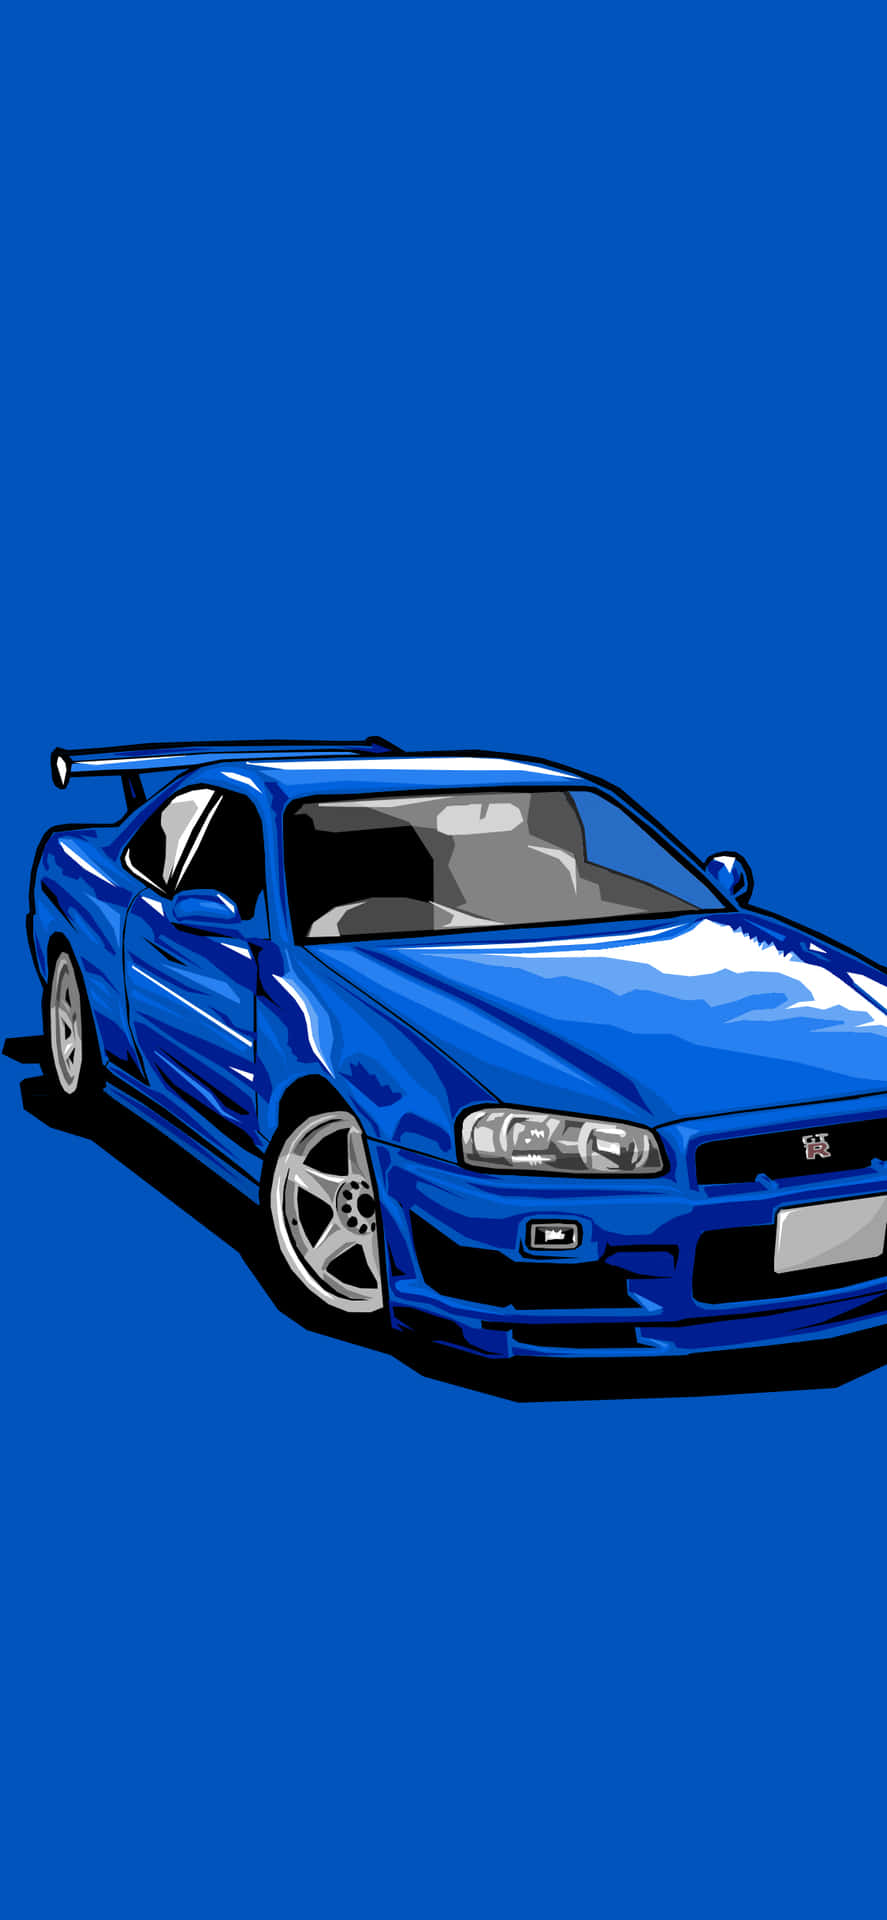 Take a Stunning Ride with a Blue Car Wallpaper